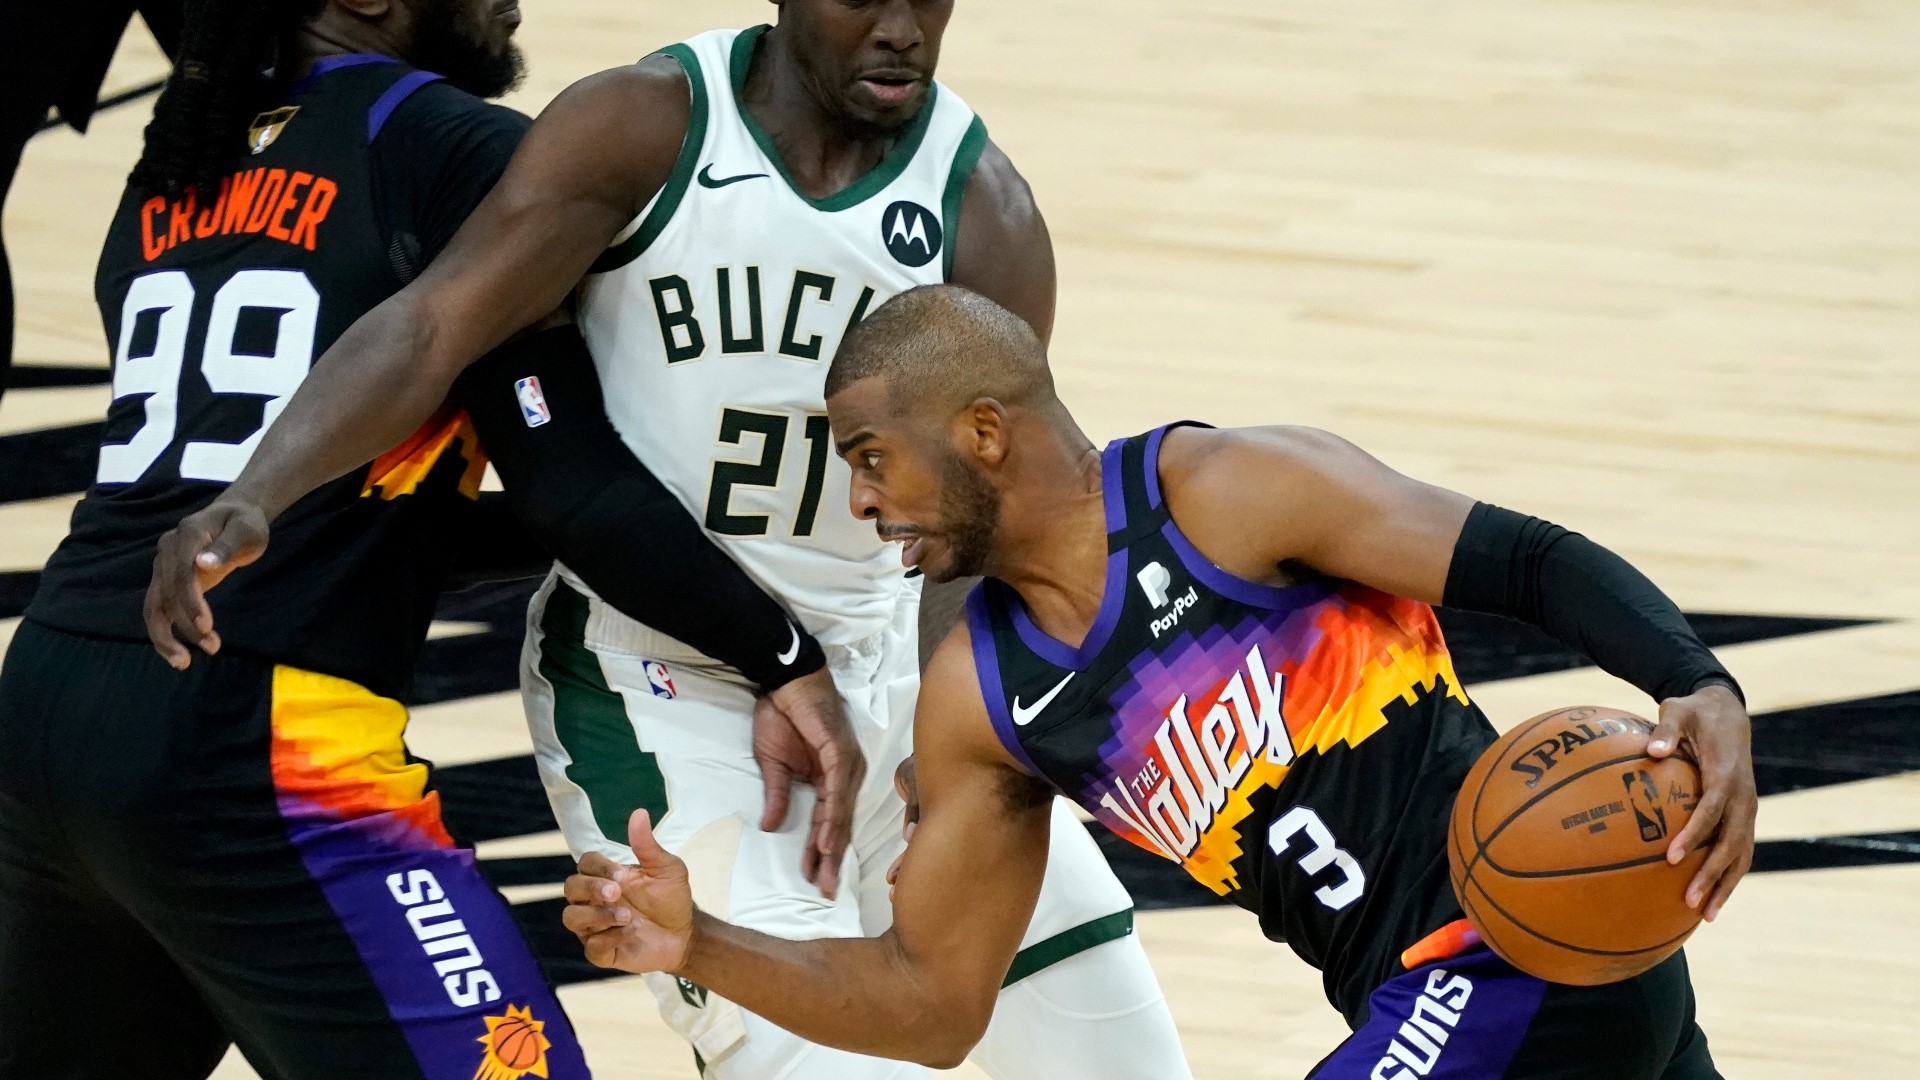 The Suns continue to show they belong as Phoenix took down the Bucks in Game 1, led by Chris Paul's 32 points and Devin Booker's 27.